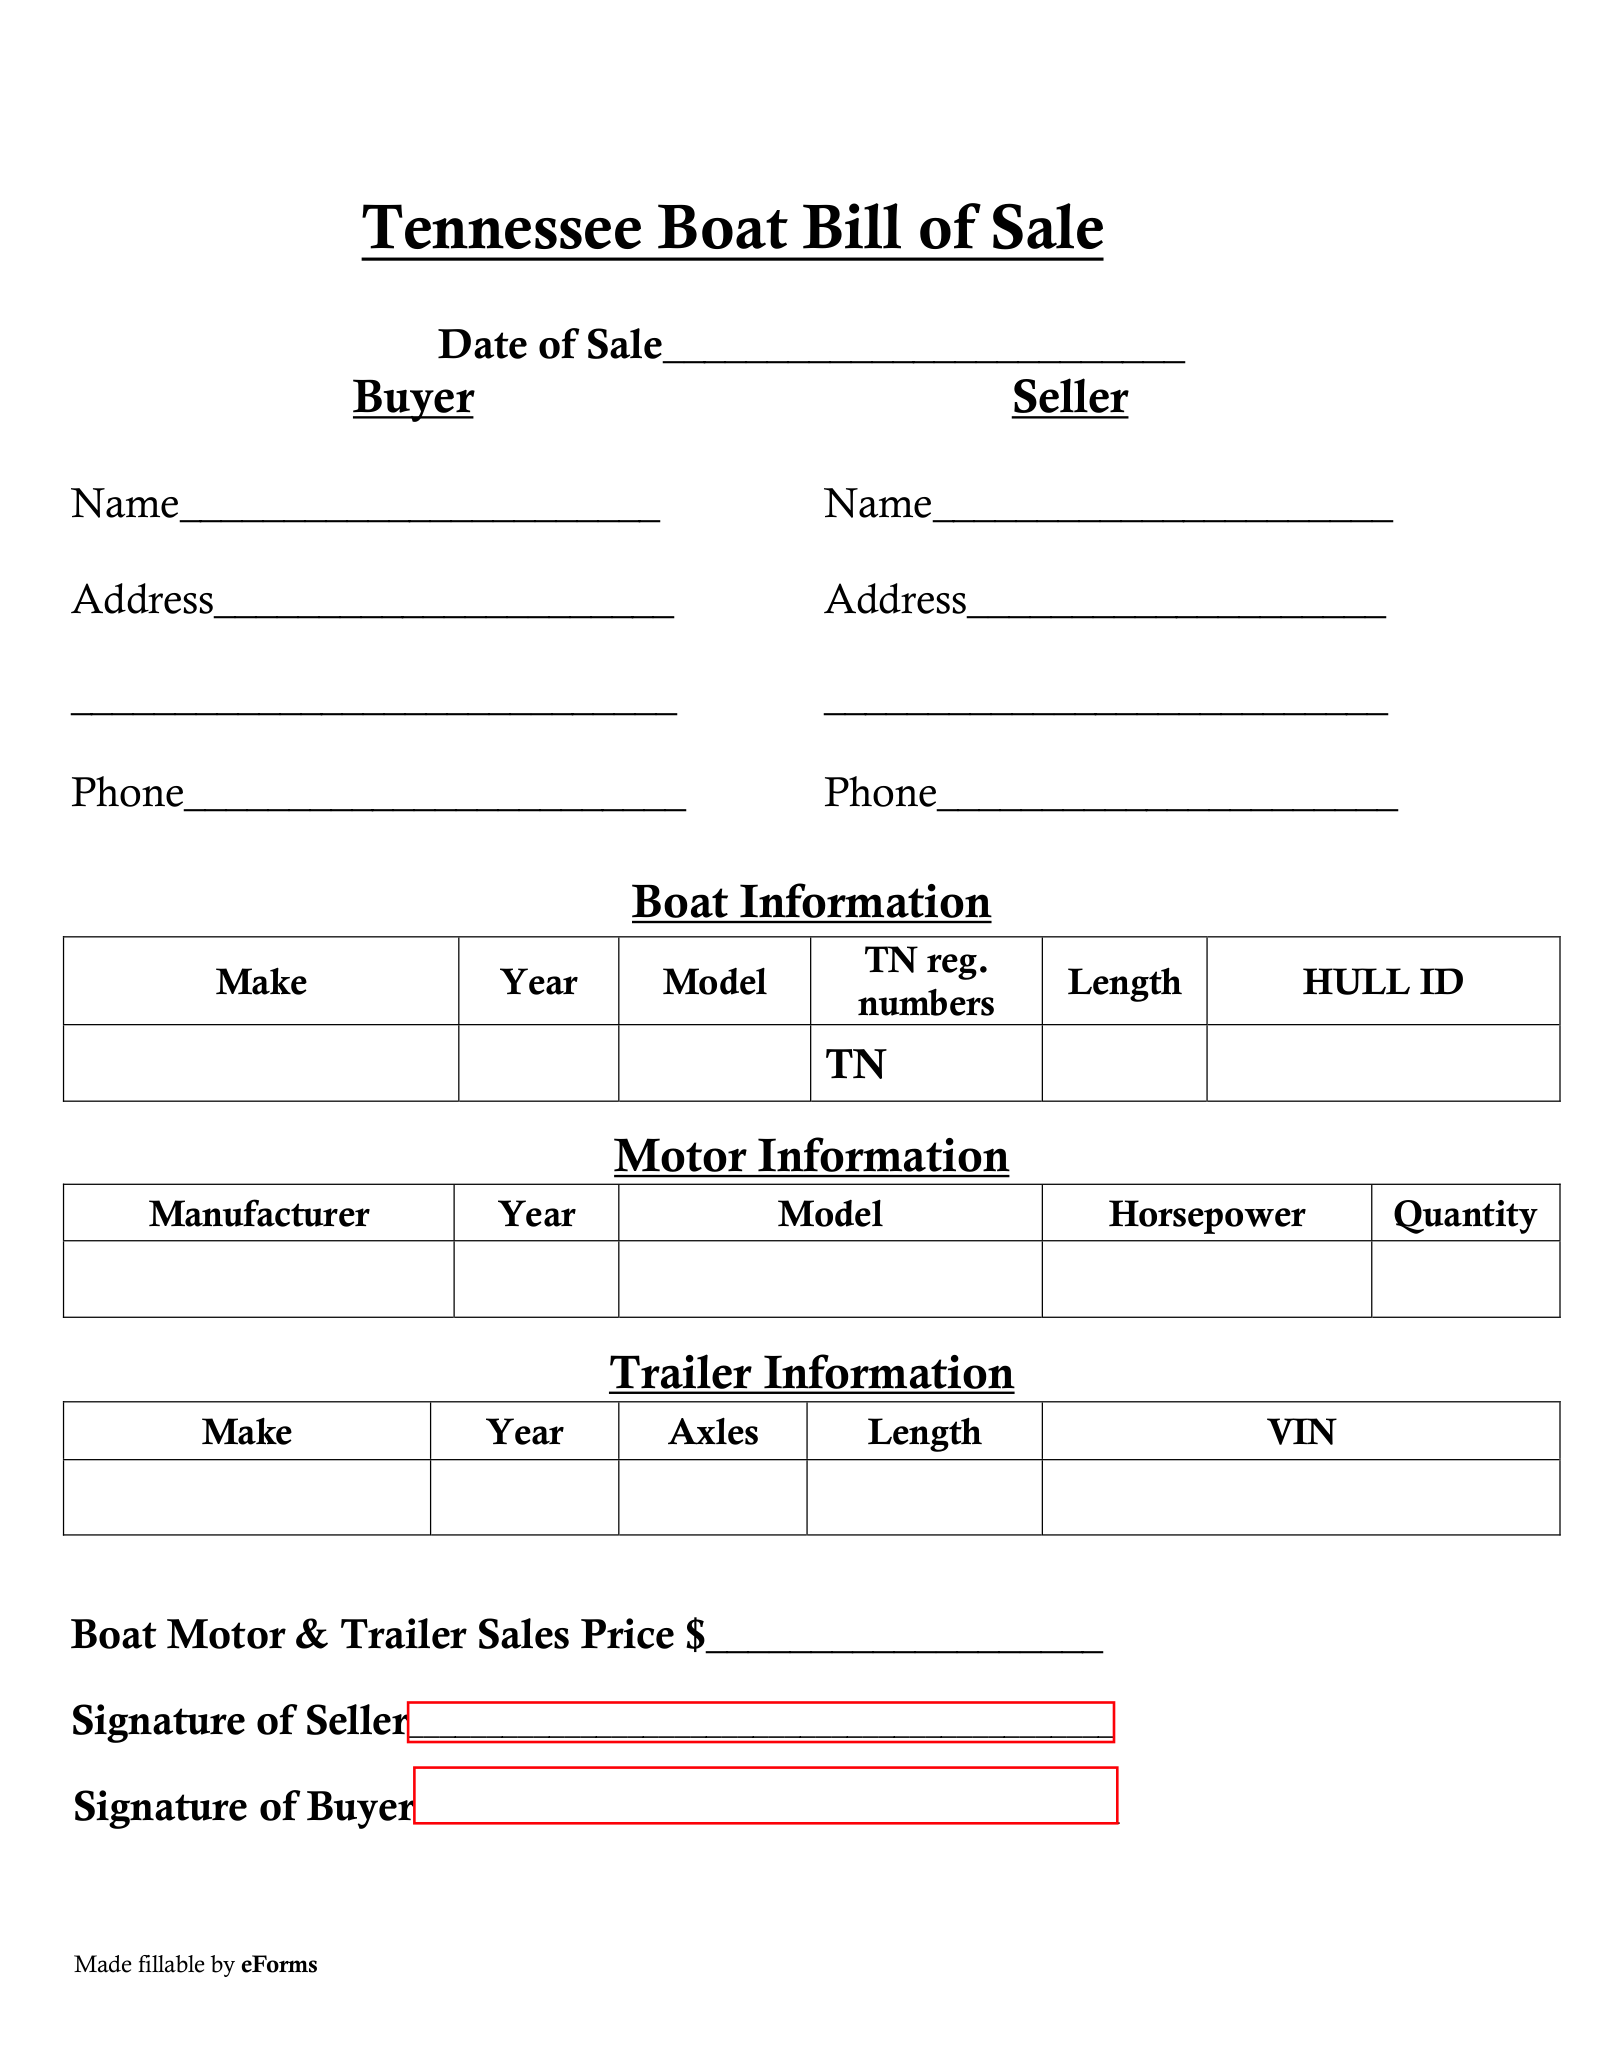 Free Tennessee Boat Bill Of Sale Form Pdf Eforms